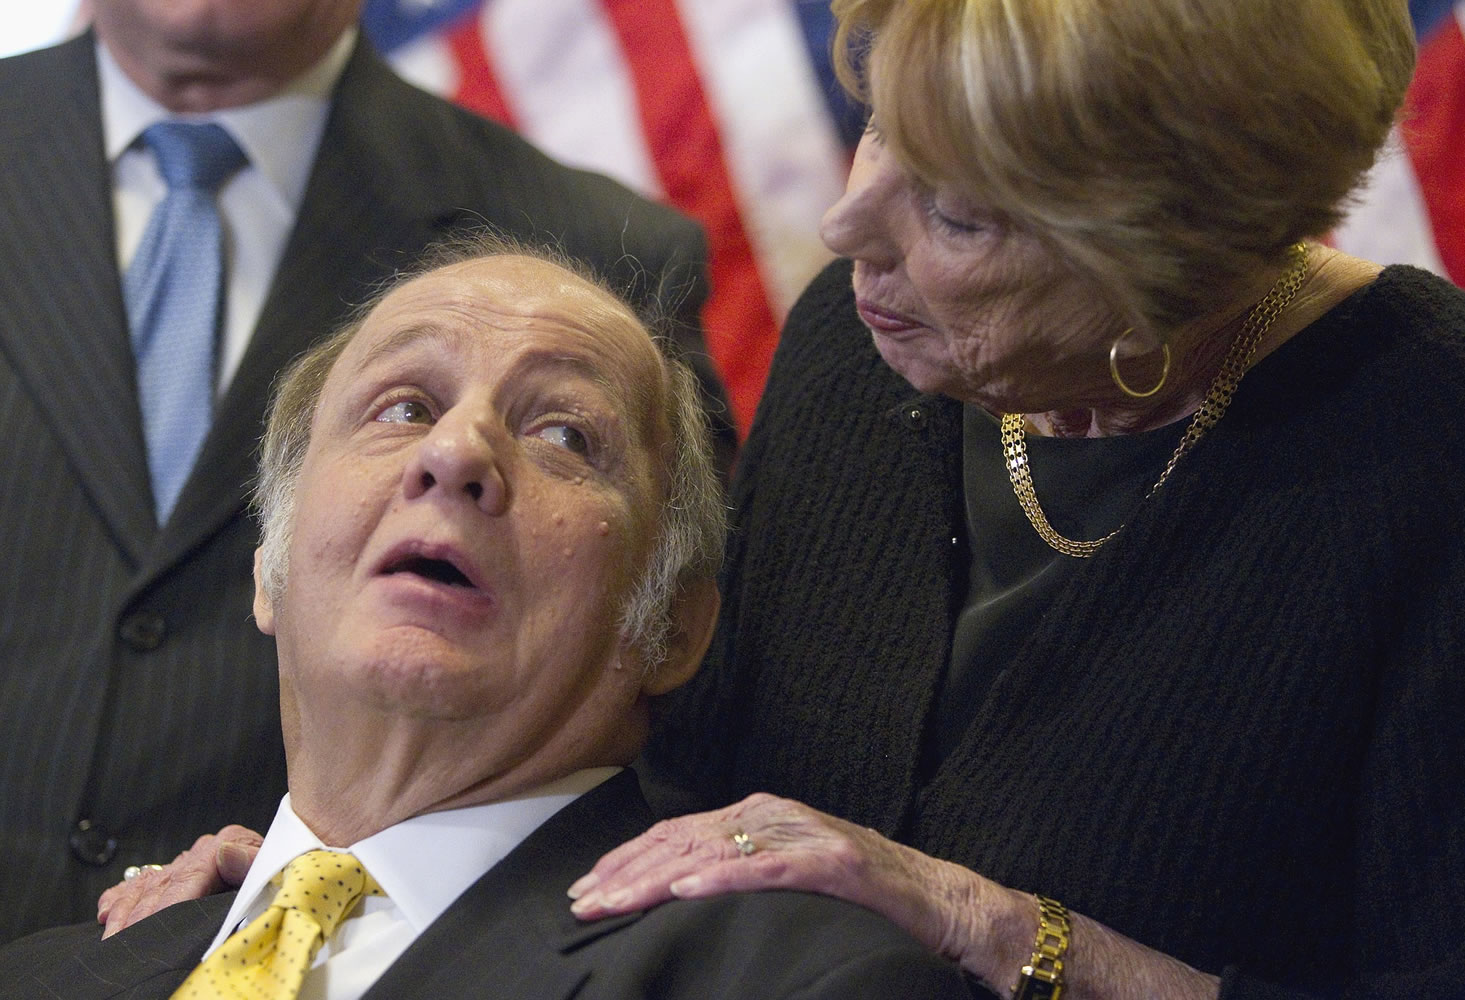 FILE - This March 30, 2011 file photo shows former White House press secretary James Brady, left, who was left paralyzed in the Reagan assassination attempt, looking at his wife Sarah Brady, during a news conference on Capitol Hill in Washington marking the 30th anniversary of the shooting. A Brady family spokeswoman says Brady has died at 73.